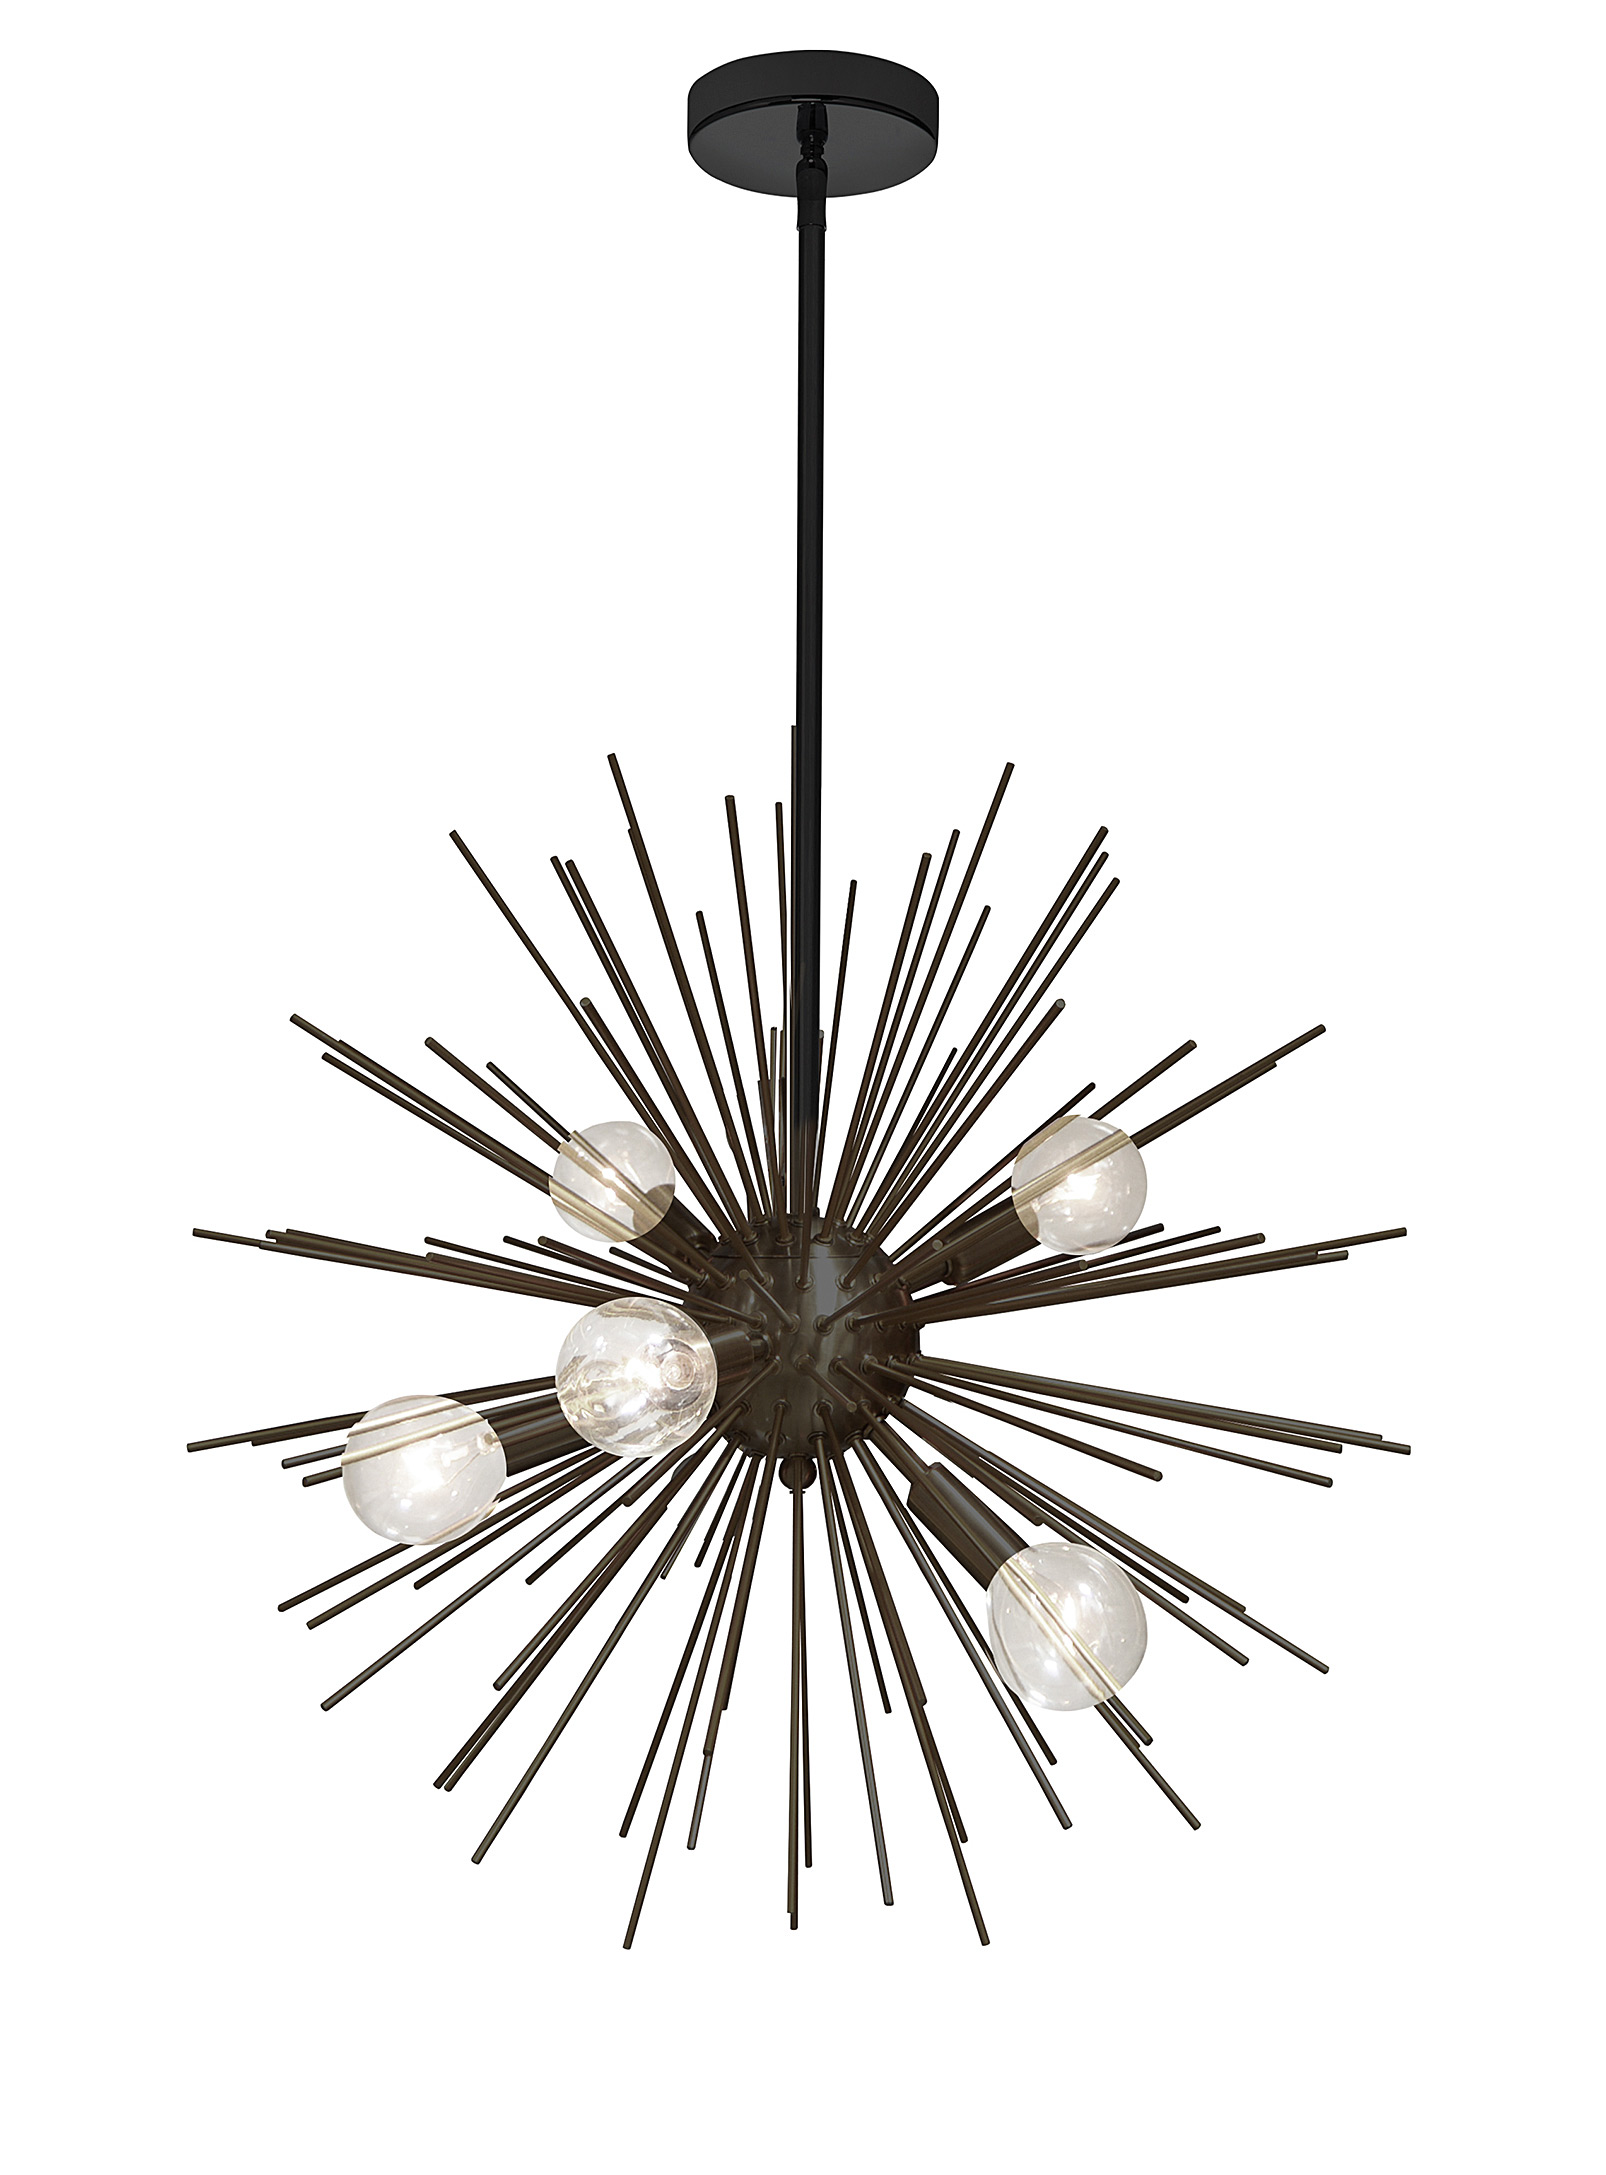 Simons Maison - Dazzling star hanging lamp See available sizes